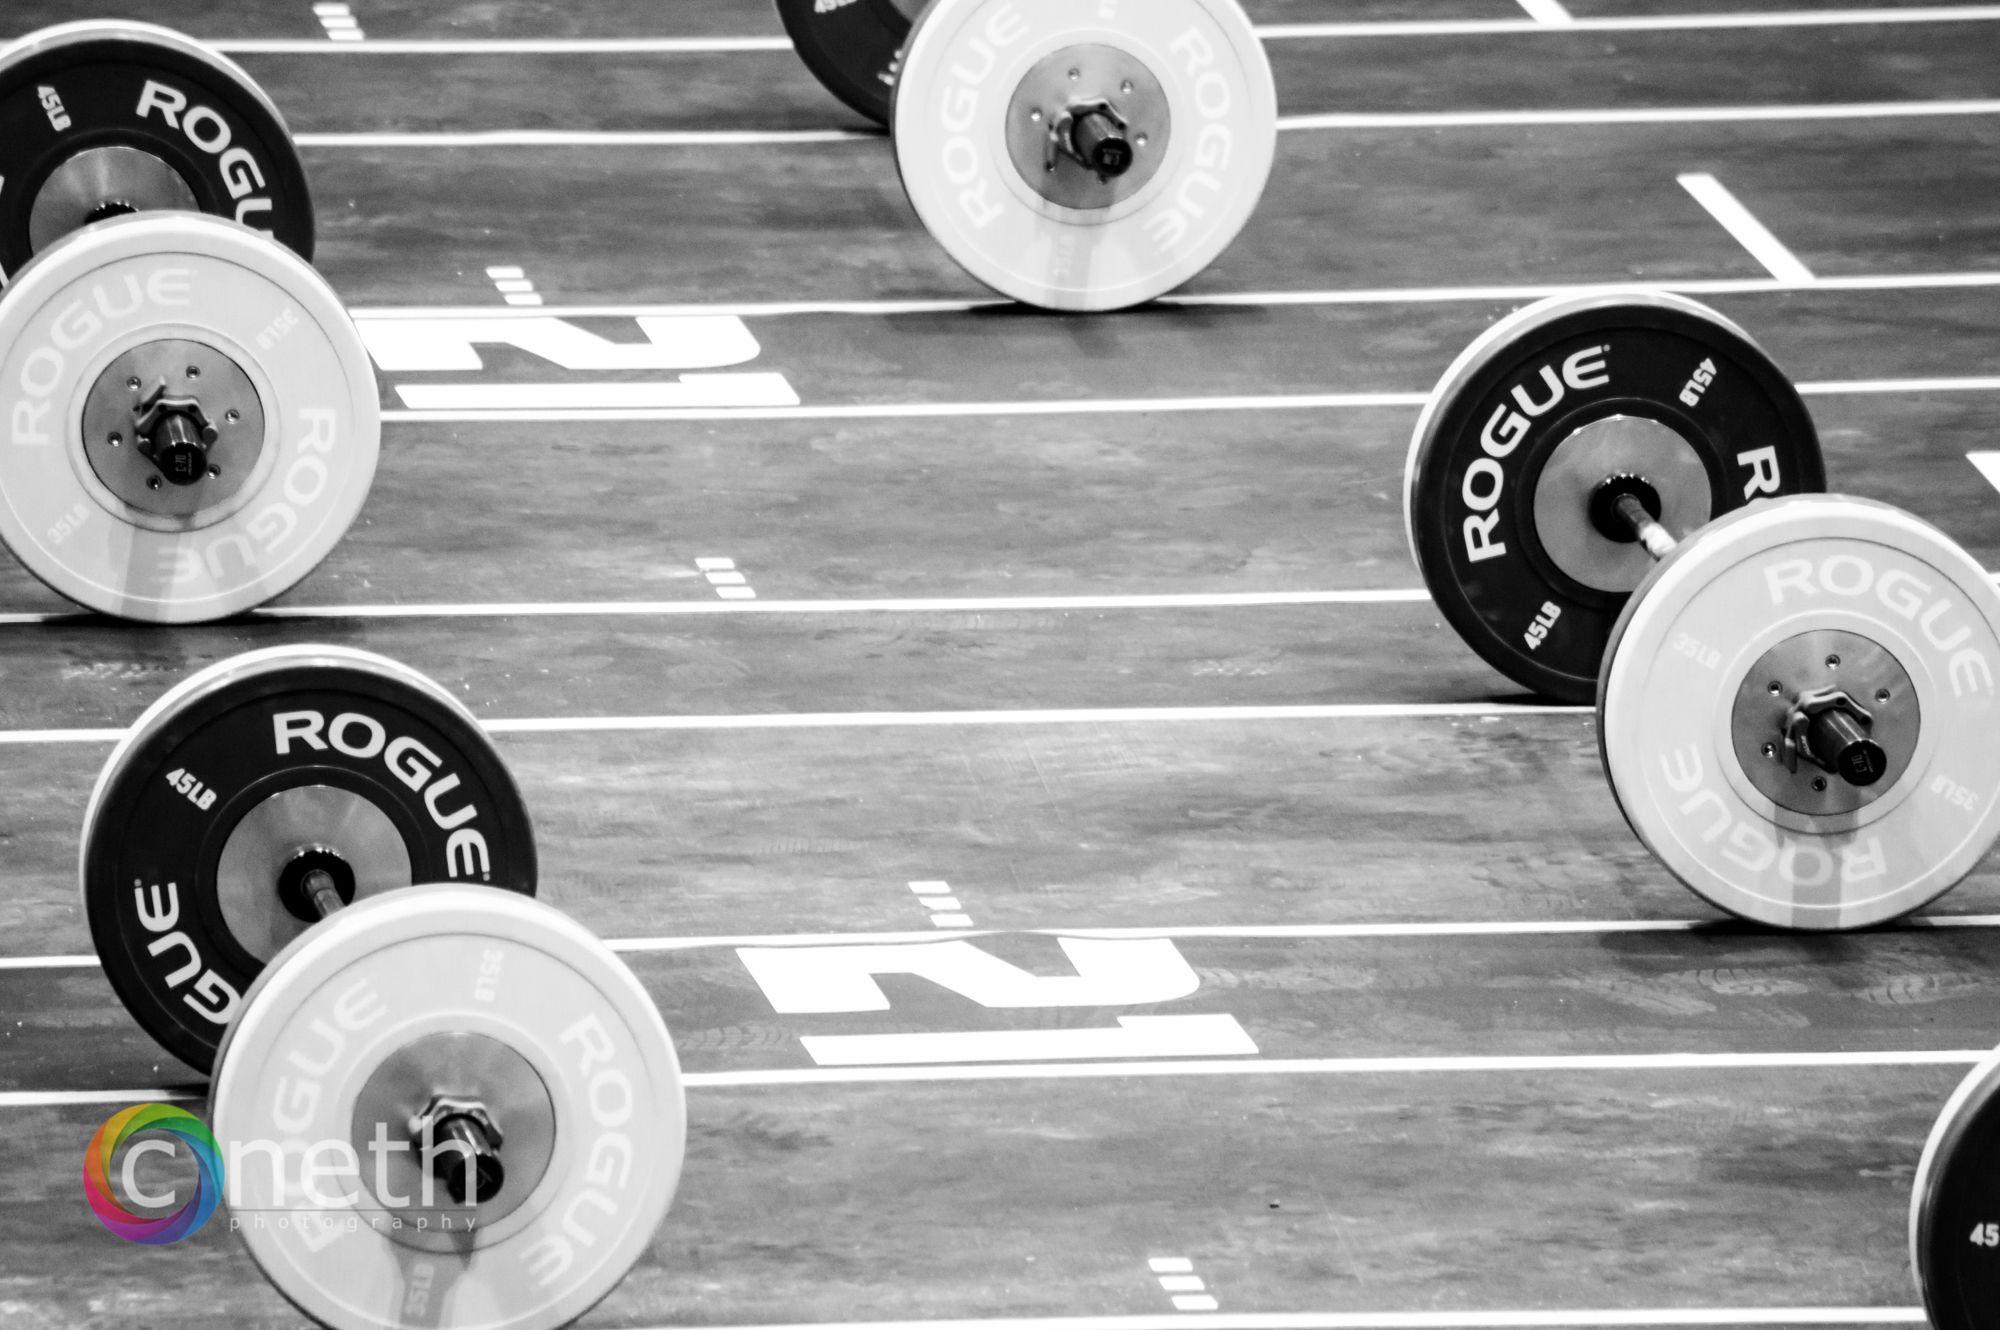 CrossFit Games Rogue Fitness. cneth photography • 365 photo project